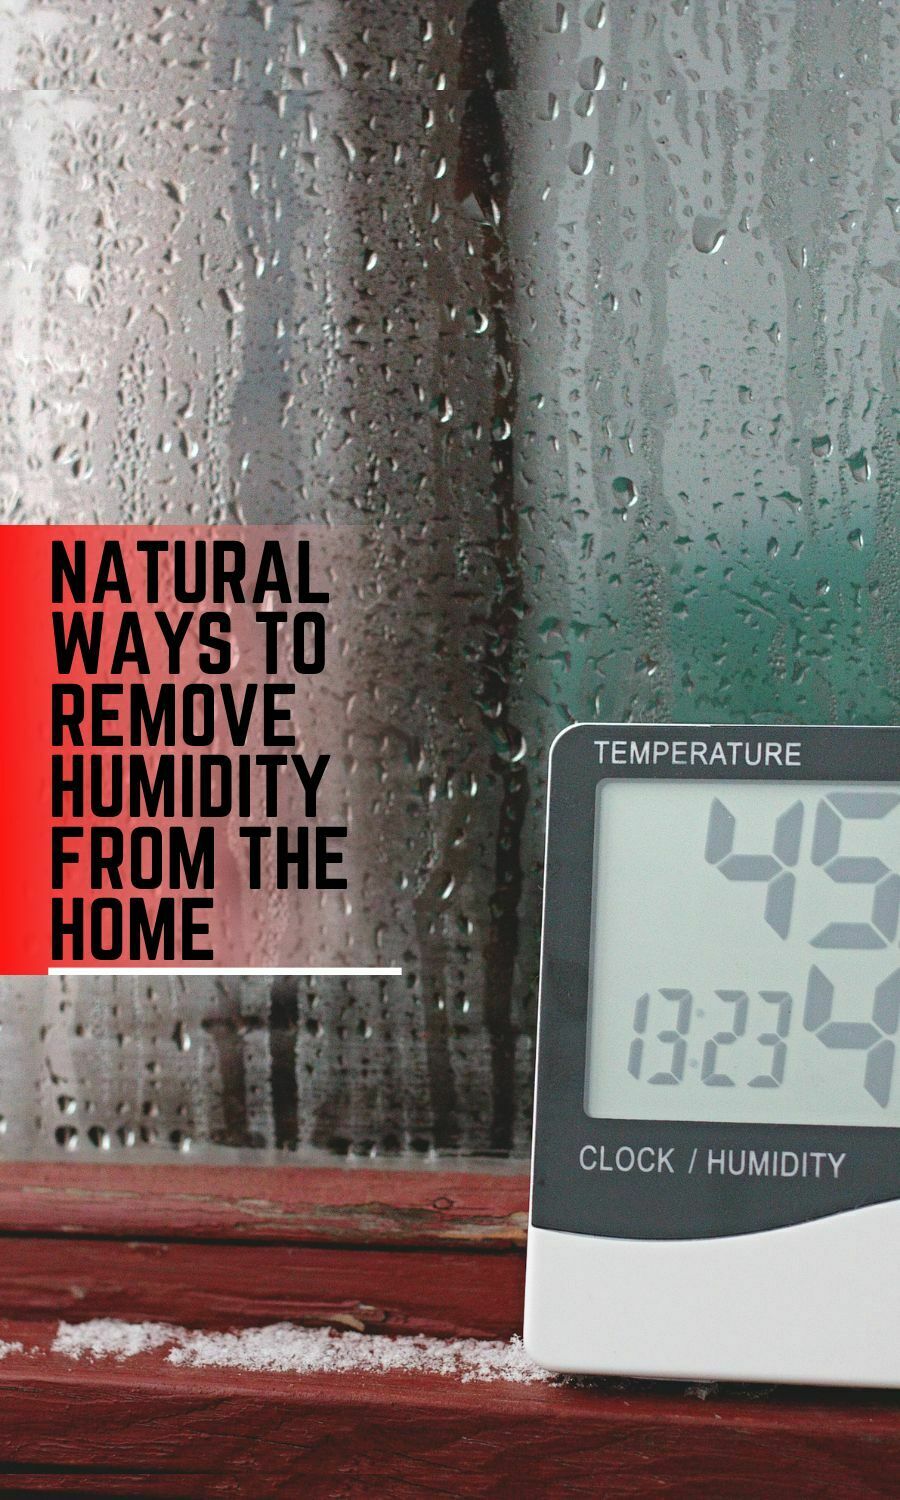 Natural Ways to Remove Humidity From the Home